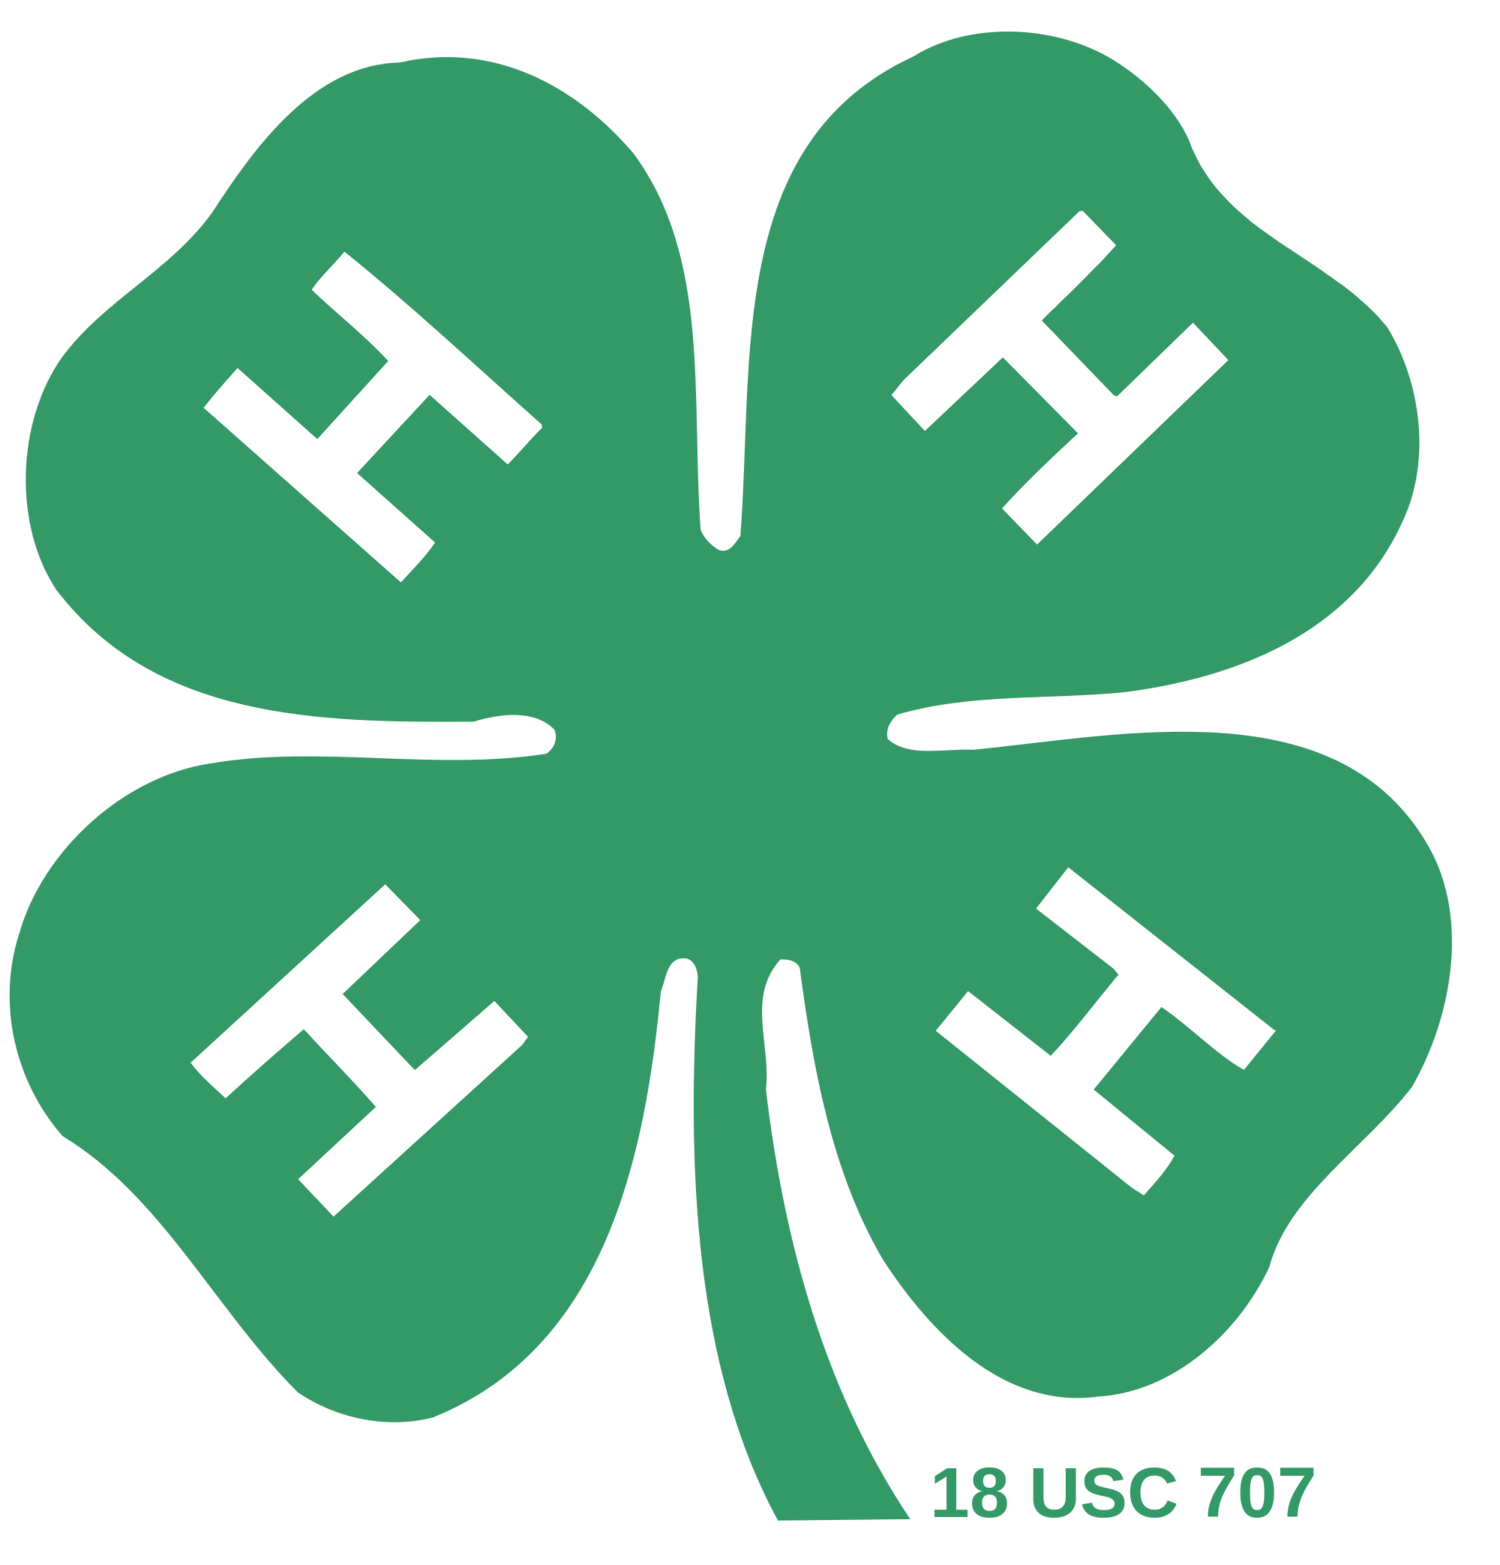 New London County 4-H Camp